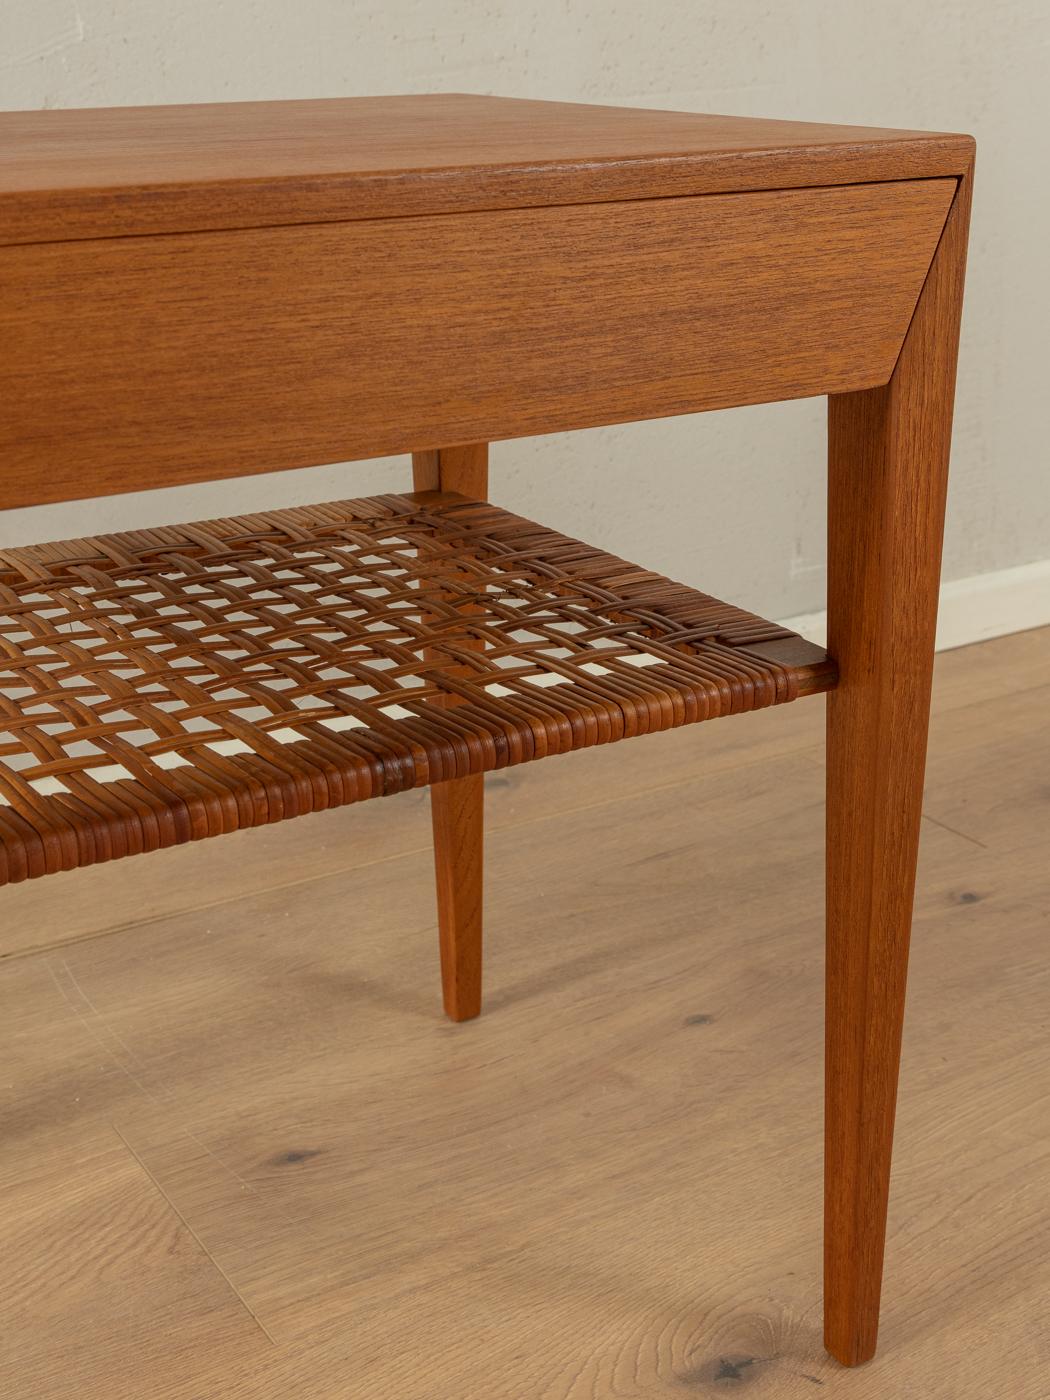 Wicker Severin Hansen bedside table with drawer, 1950s For Sale